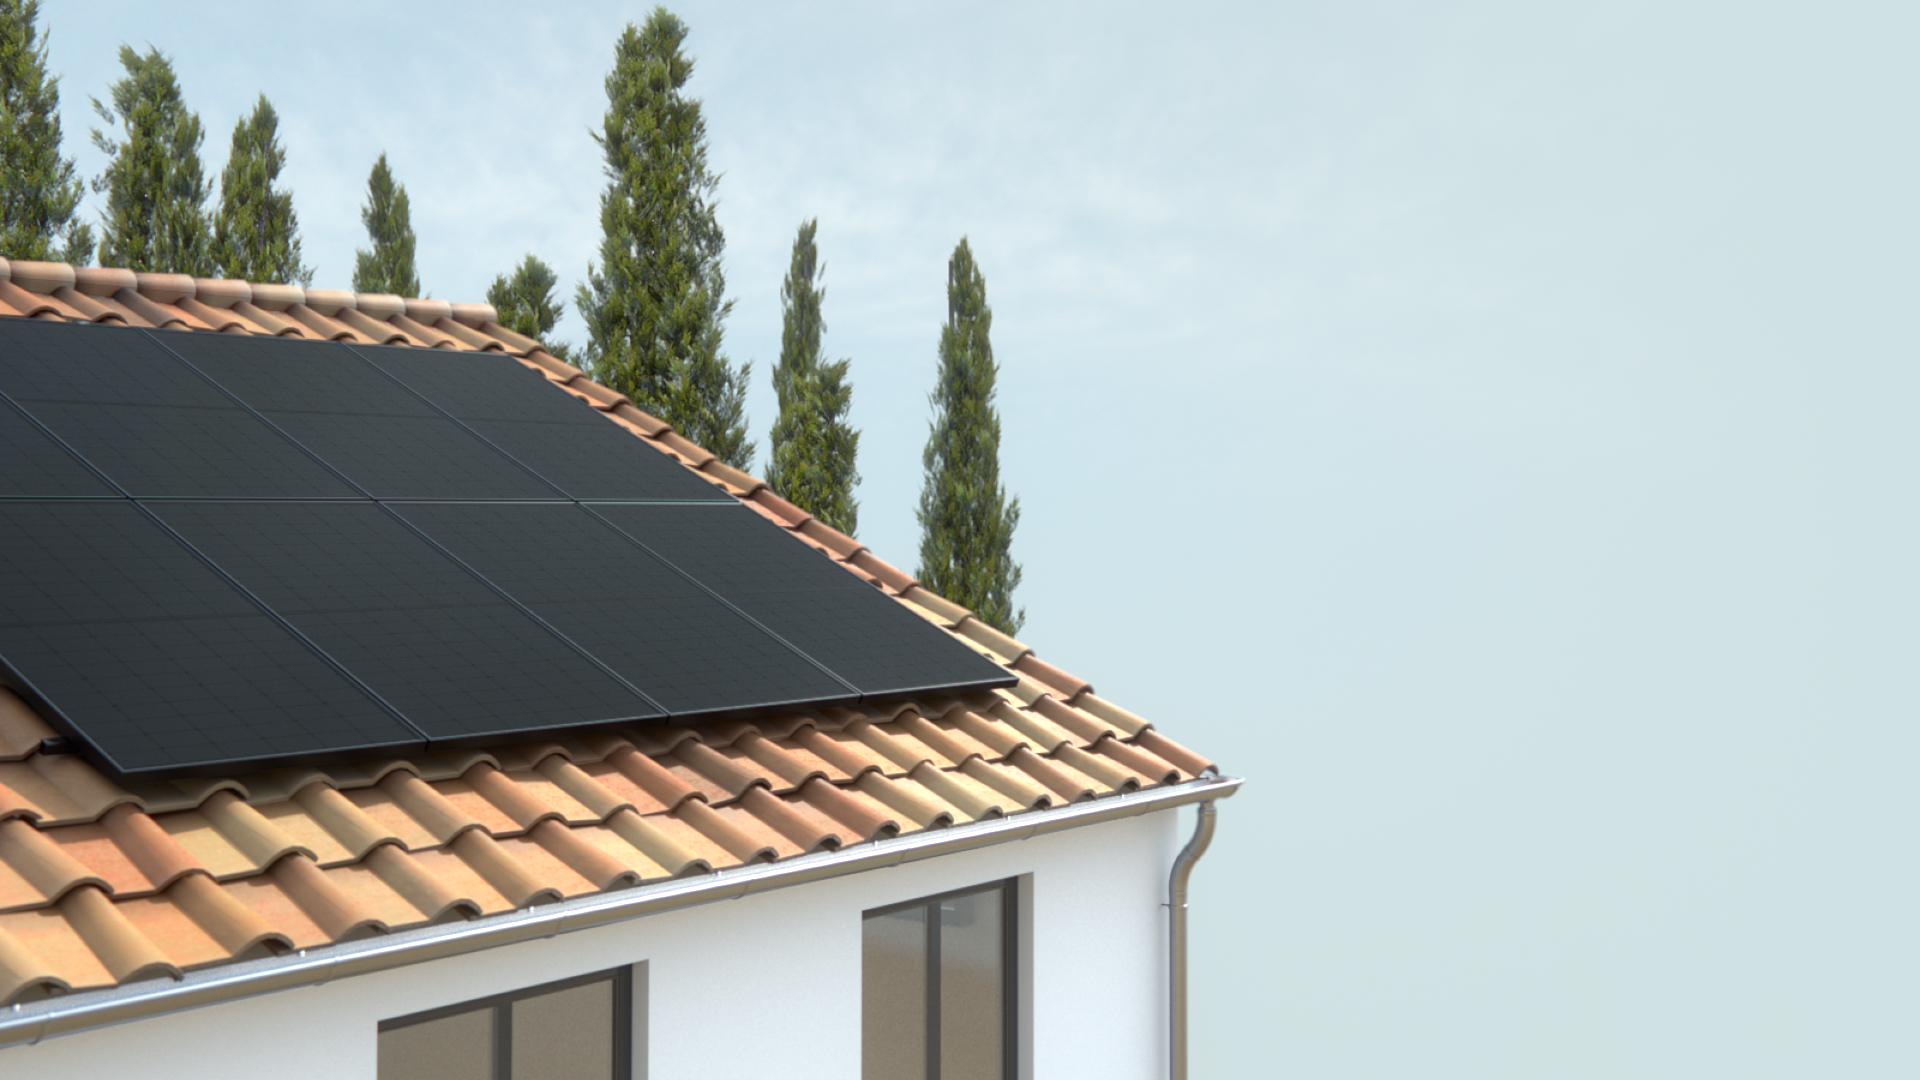 Contact SOLARhome